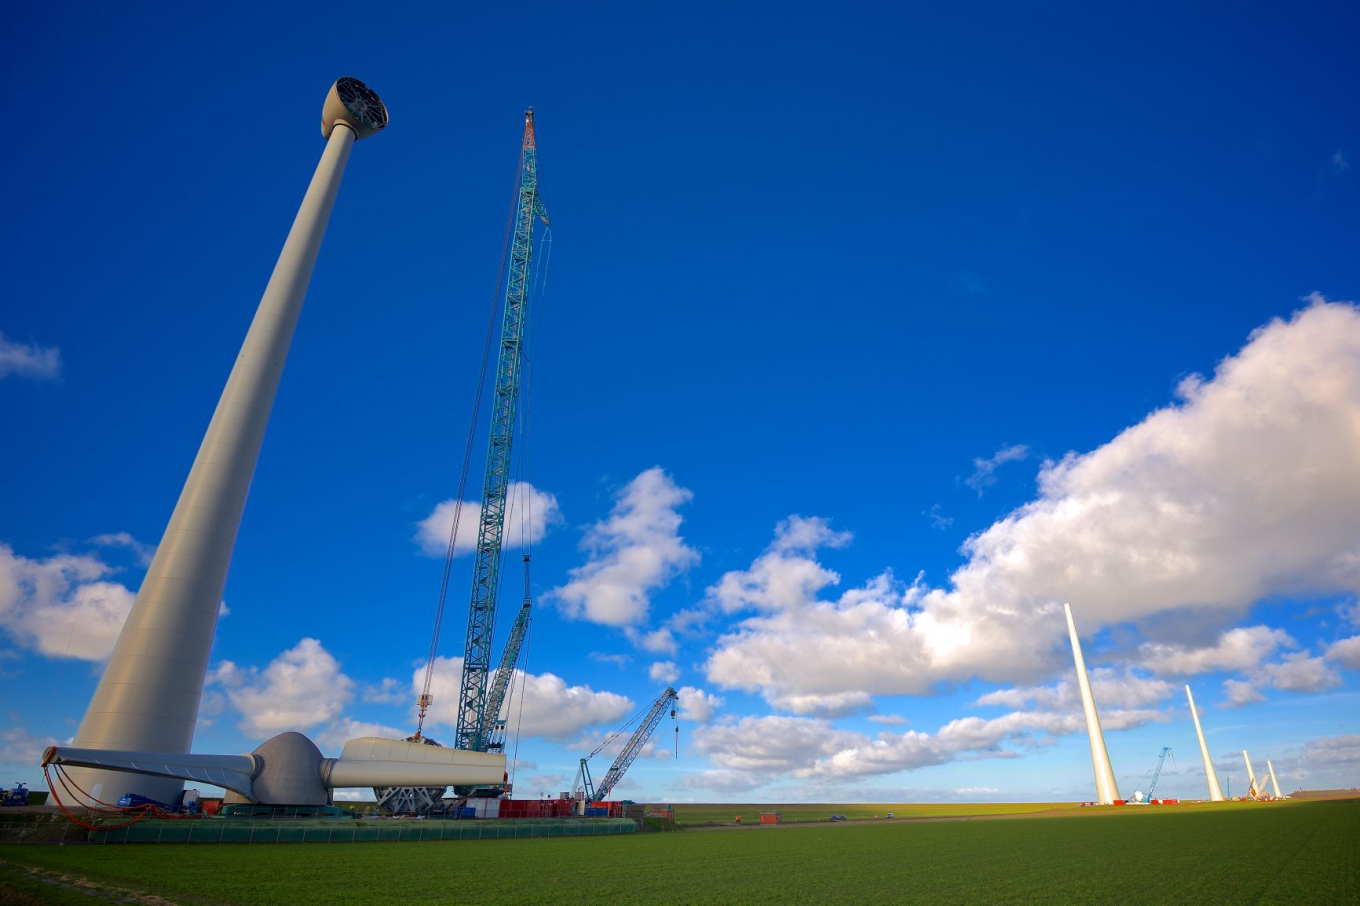 Construction of wind turbines in a spacious landscape